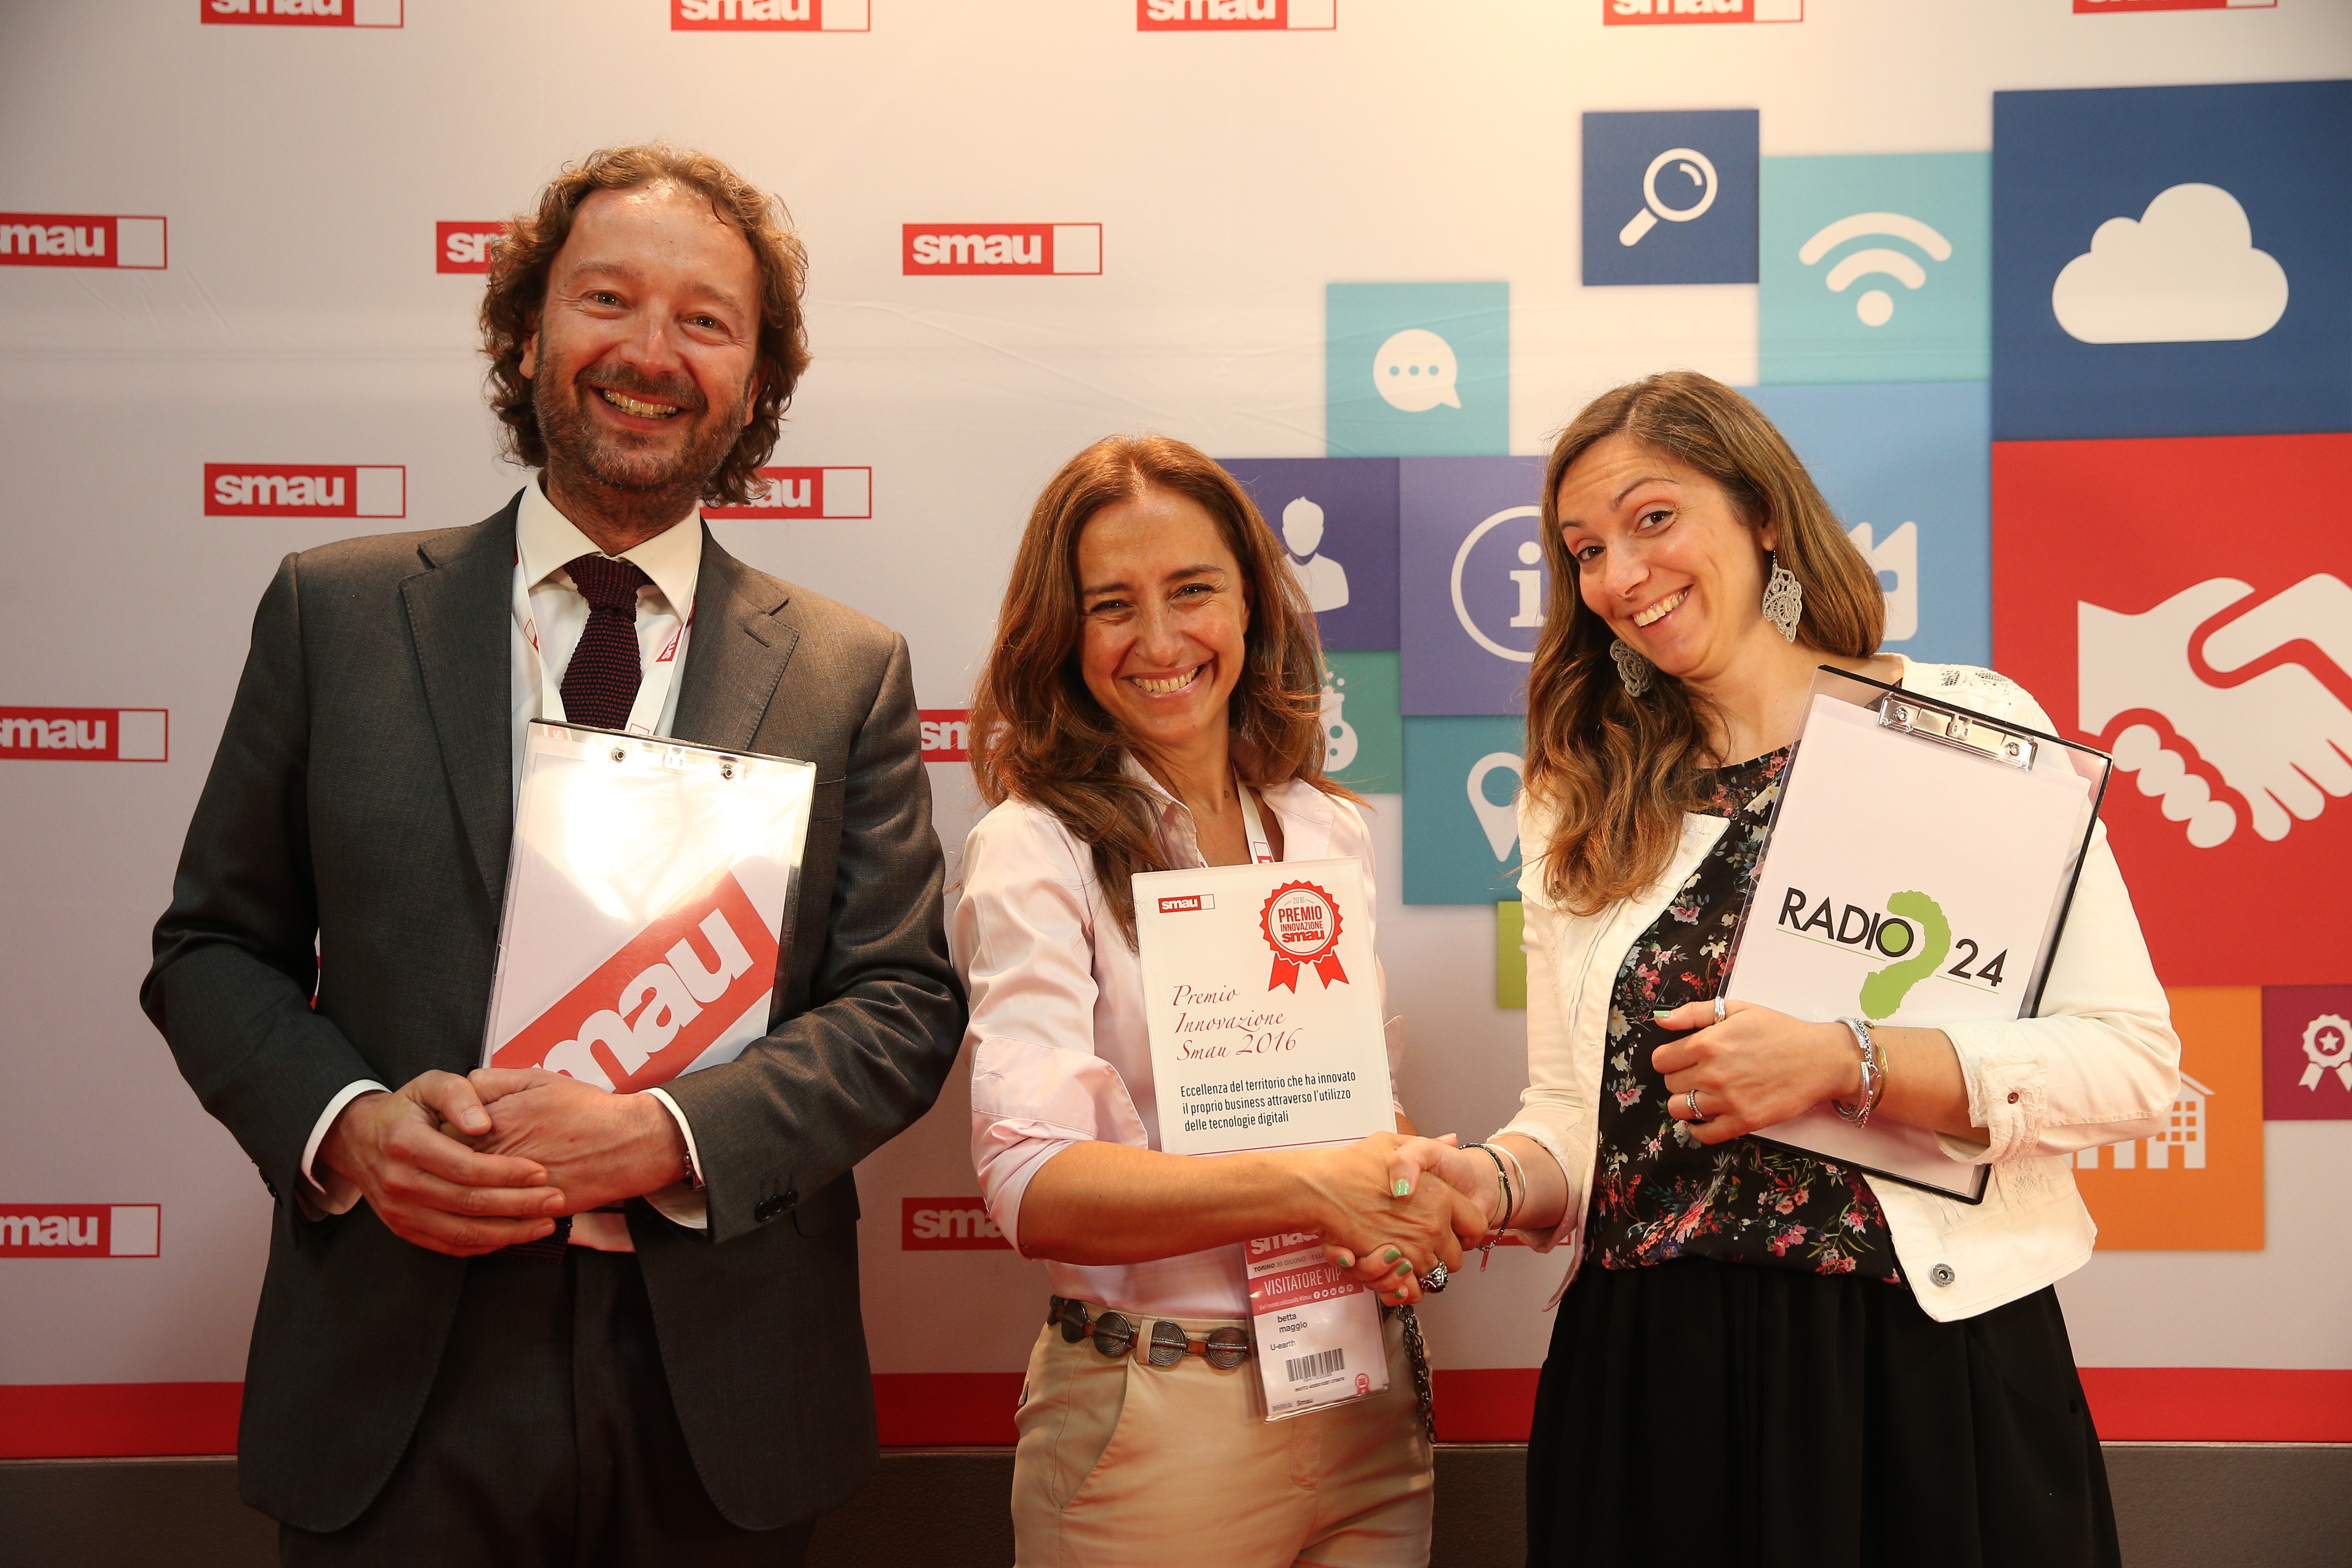 U-earth wins the SMAU2016 innovation award for Pure Air Zone project